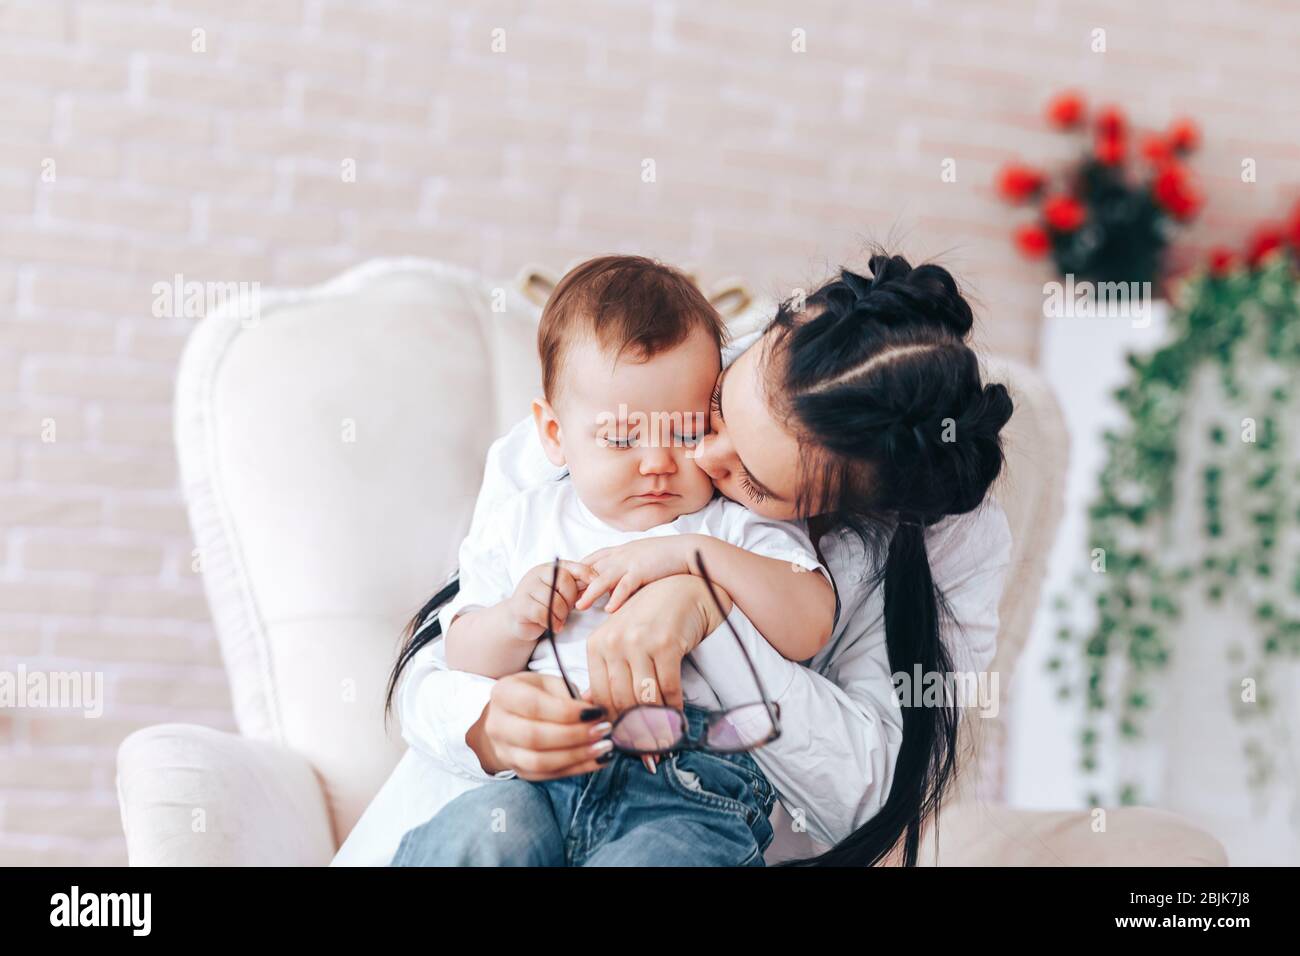 little boy with mom are sitting in a chair mom and son are hugging in a chair holding glasses in their hands advertising glasses what to do if poor 2BJK7J8